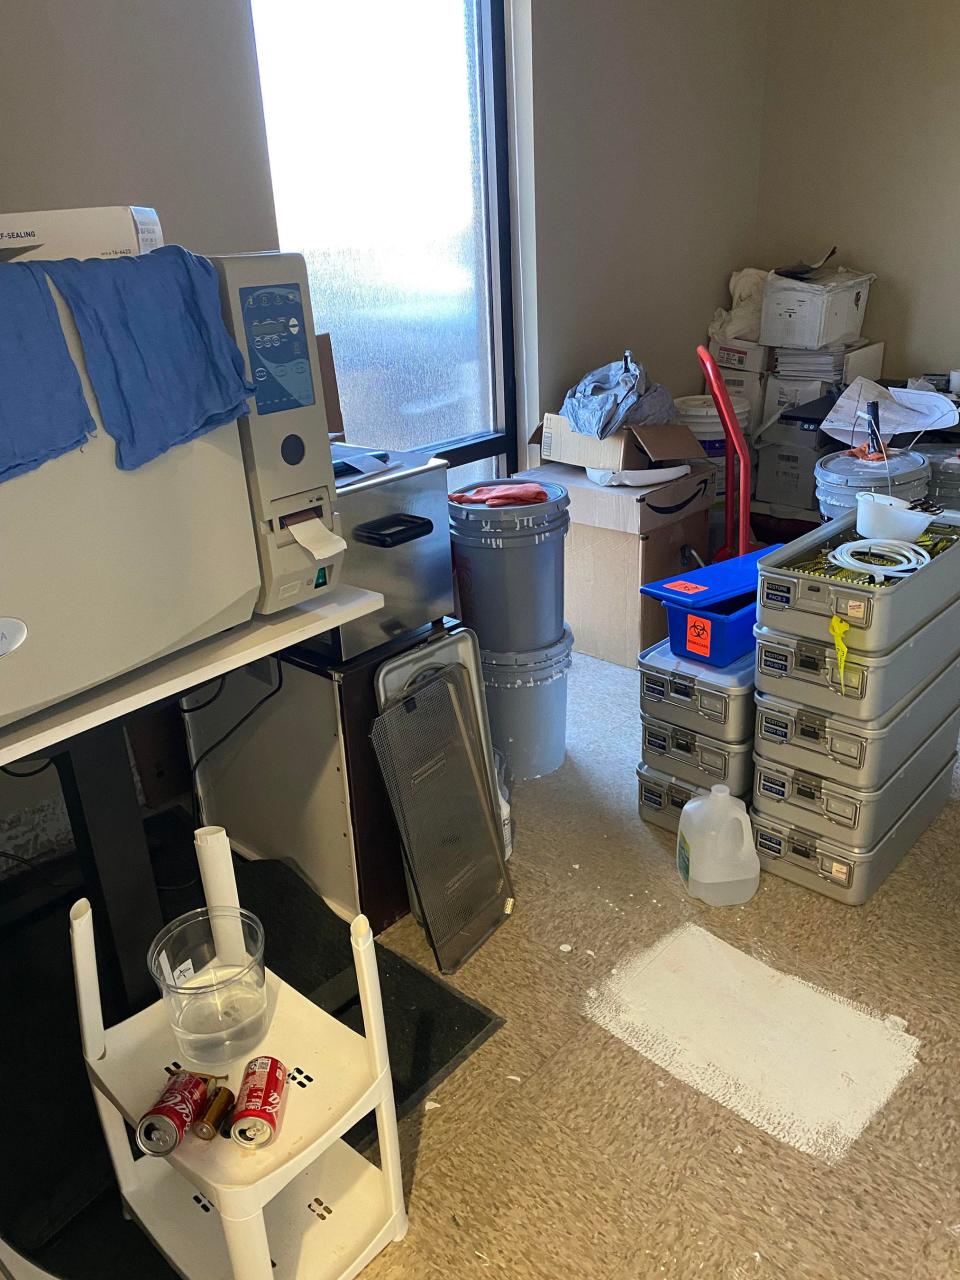 A room at Restore Plastic Surgery, where ex-employees say equipment was cleaned and processed prior to procedures in what they say should have been a sterile environment.